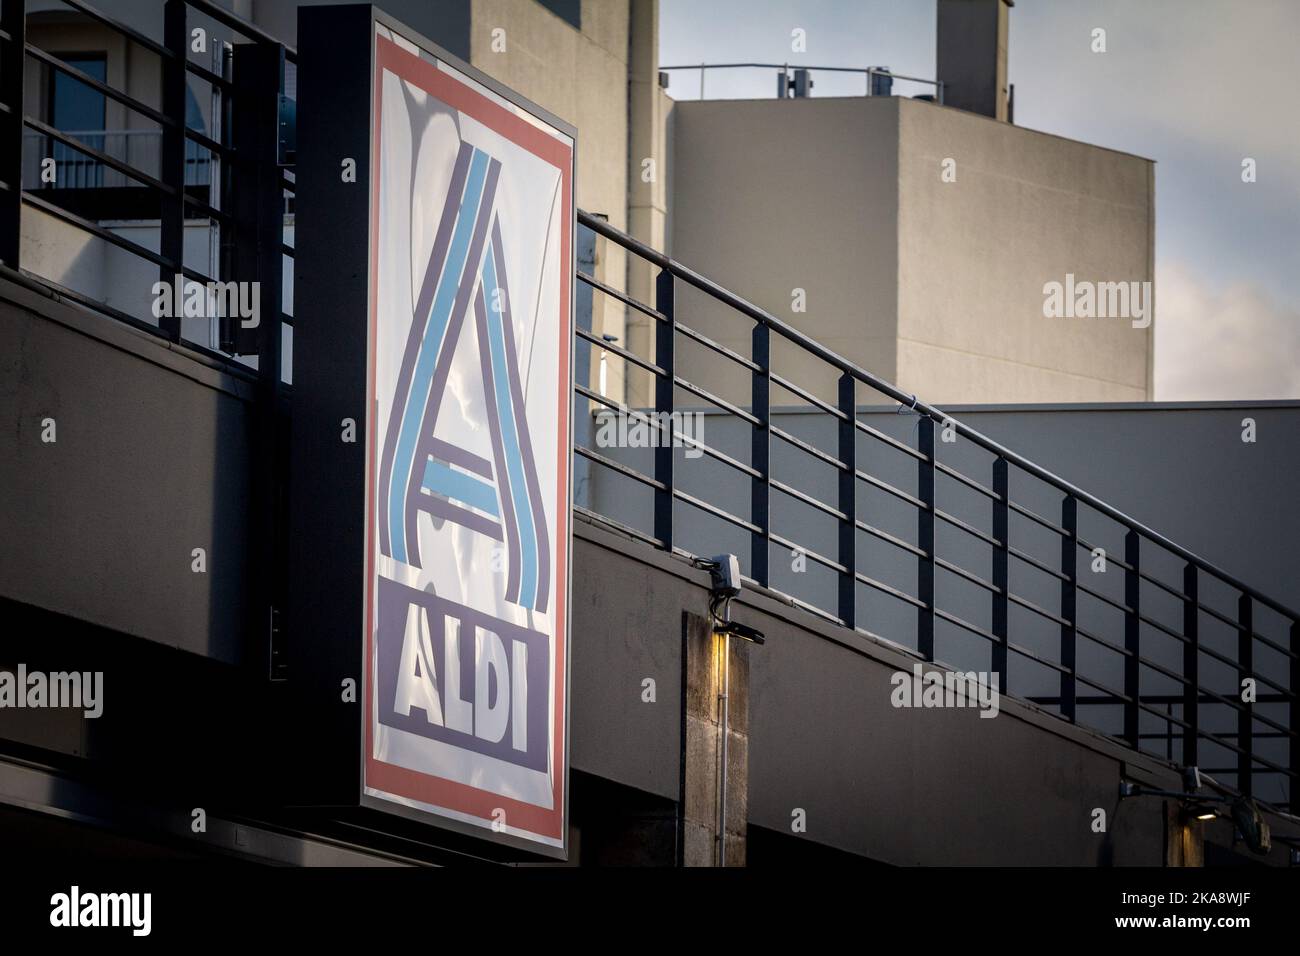 Picture of the Aldi Nord sign on one of their stores of Bordeaux, France. Aldi, or Albrecht Diskont, is a brand of two discount supermarket chains wit Stock Photo